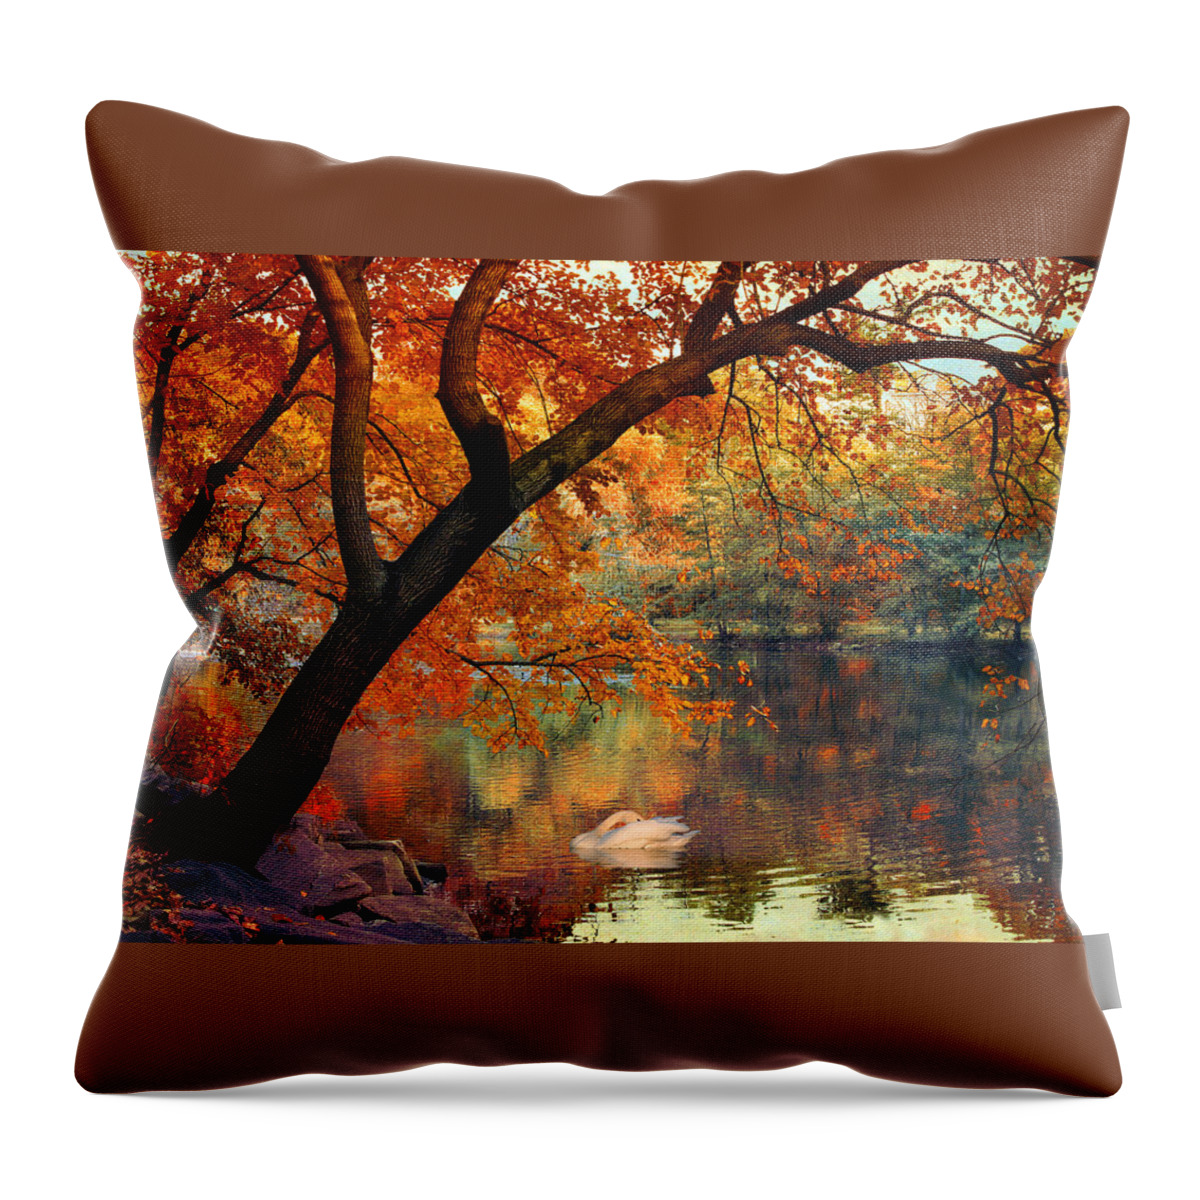 Autumn Throw Pillow featuring the photograph Riverbank Foliage Reflections by Jessica Jenney